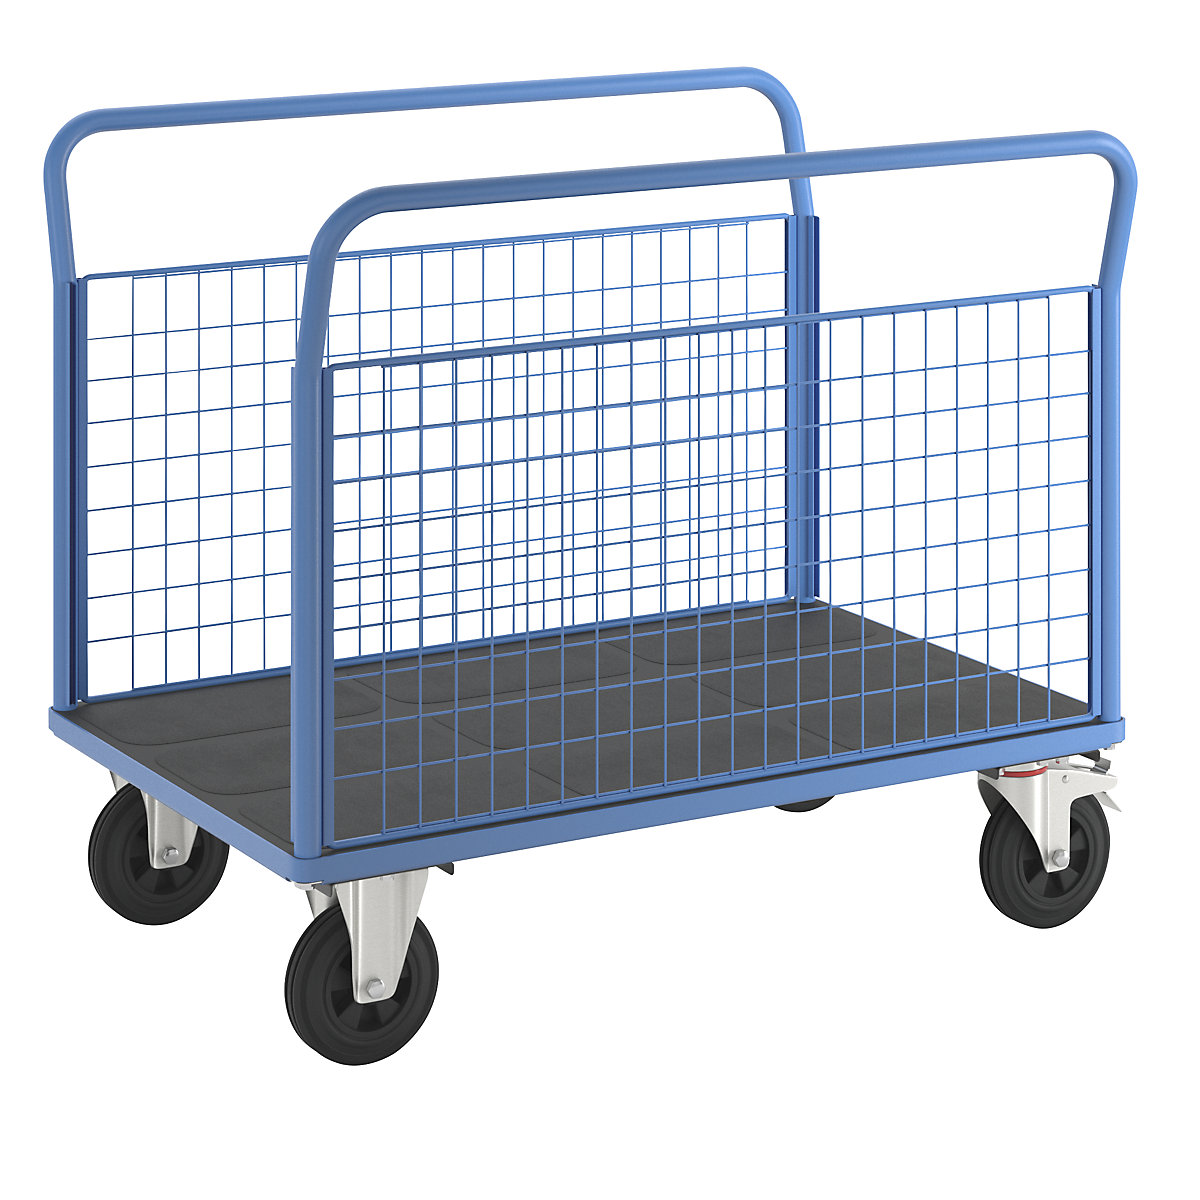 Platform truck – eurokraft pro, with 2 mesh side panels, LxW 1250 x 800 mm, solid rubber tyres-9